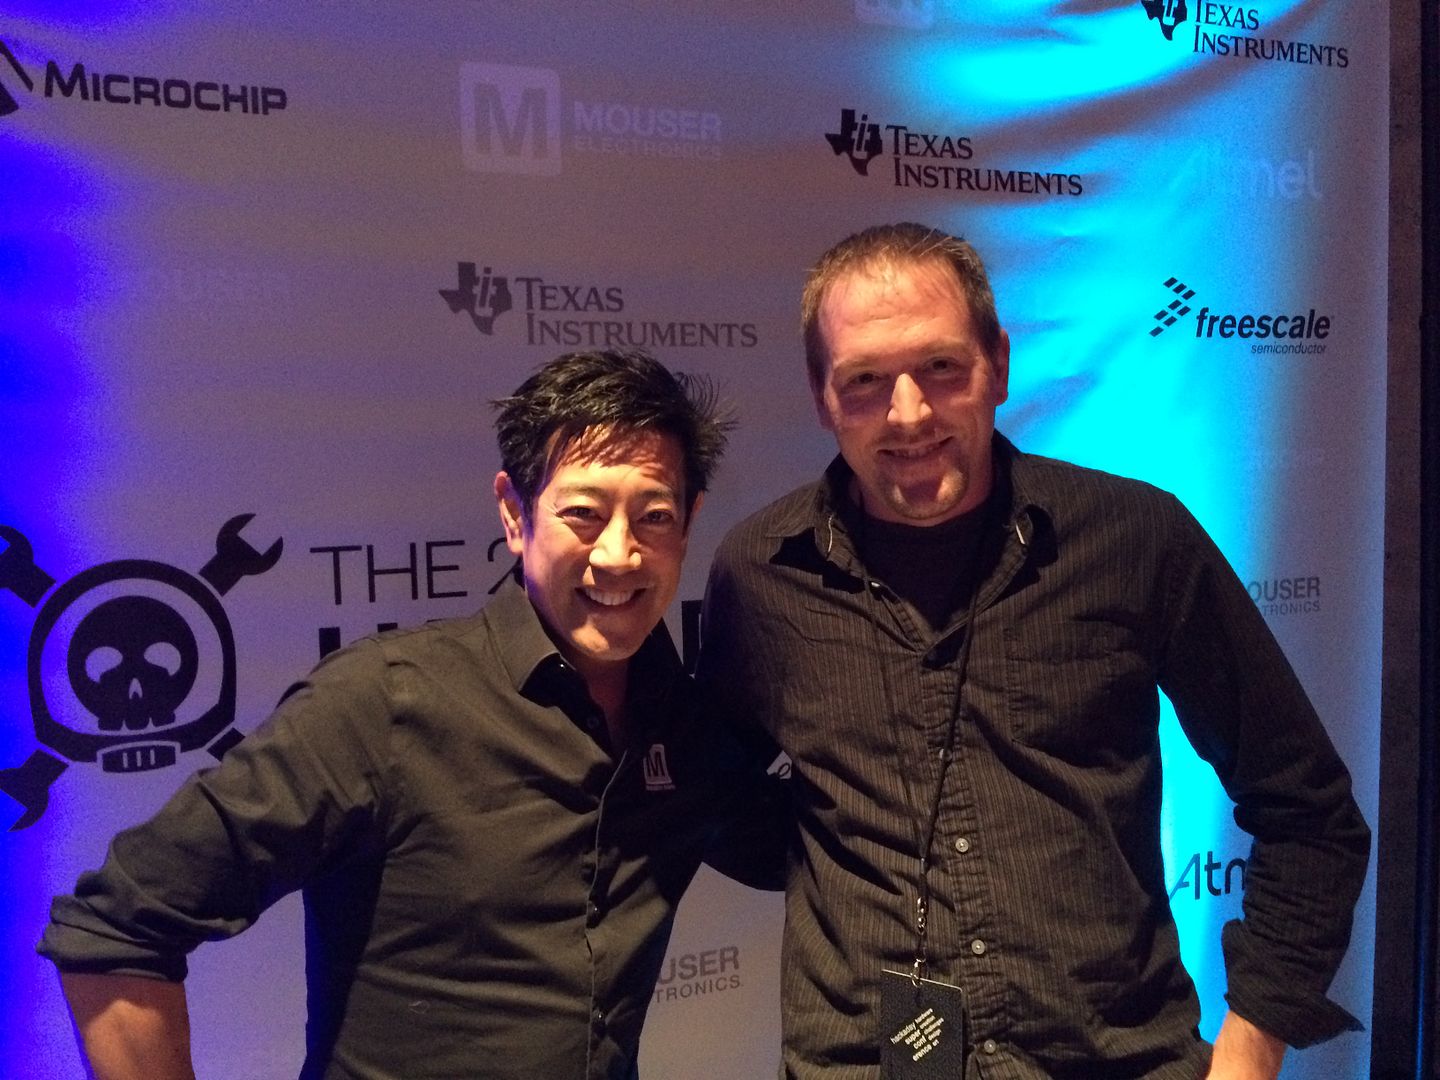 Eric William of mkme.org with Grant Imahara